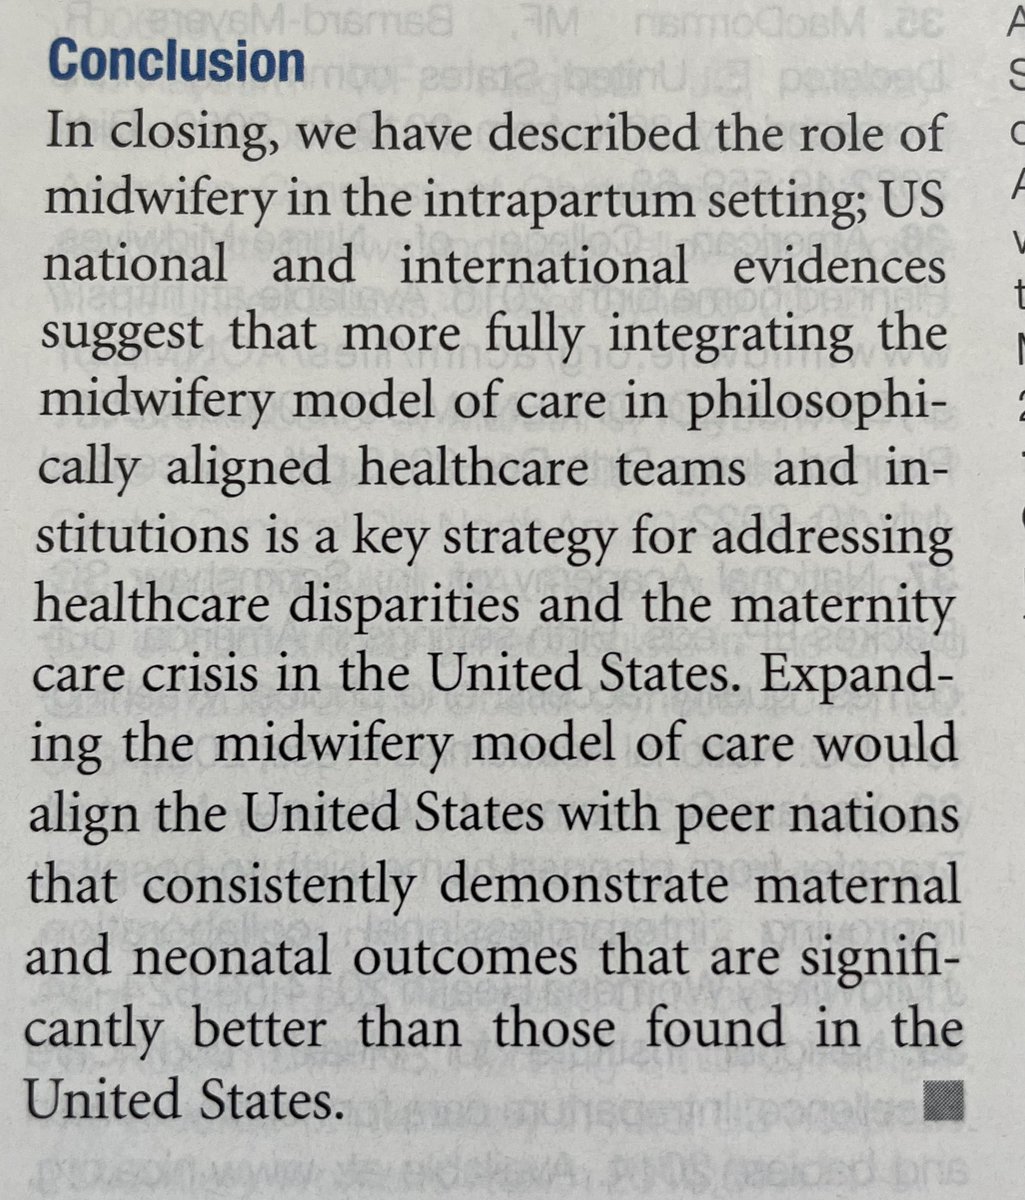 Just a reminder that midwifery care improves birth outcomes

ajog.org/article/S0002-…